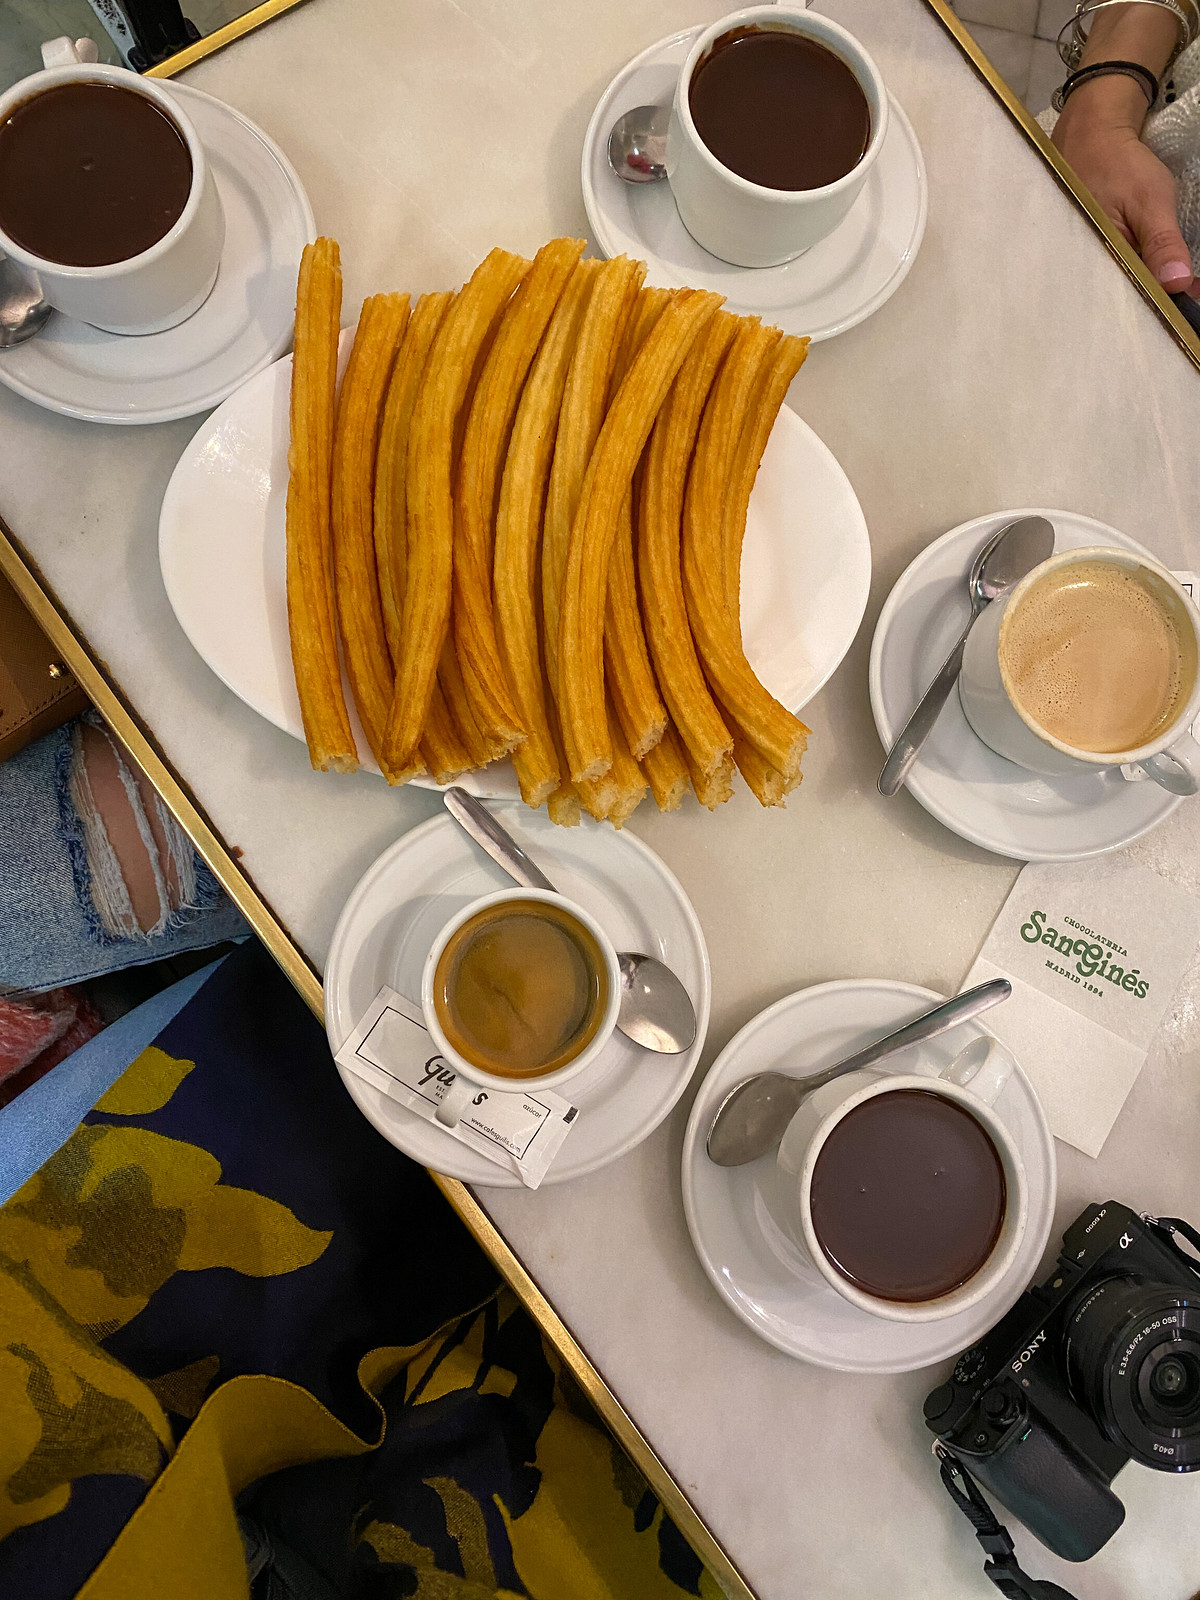 Chocolate and Churros at San Gines | Photos to Inspire You to Visit Spain | European Vacation Inspiration | Spain Travel | Spain Aesthetics | Spain Aesthetic | Most Beautiful Places in Spain | Best Places to Visit in Spain | Famous Madrid Landmarks